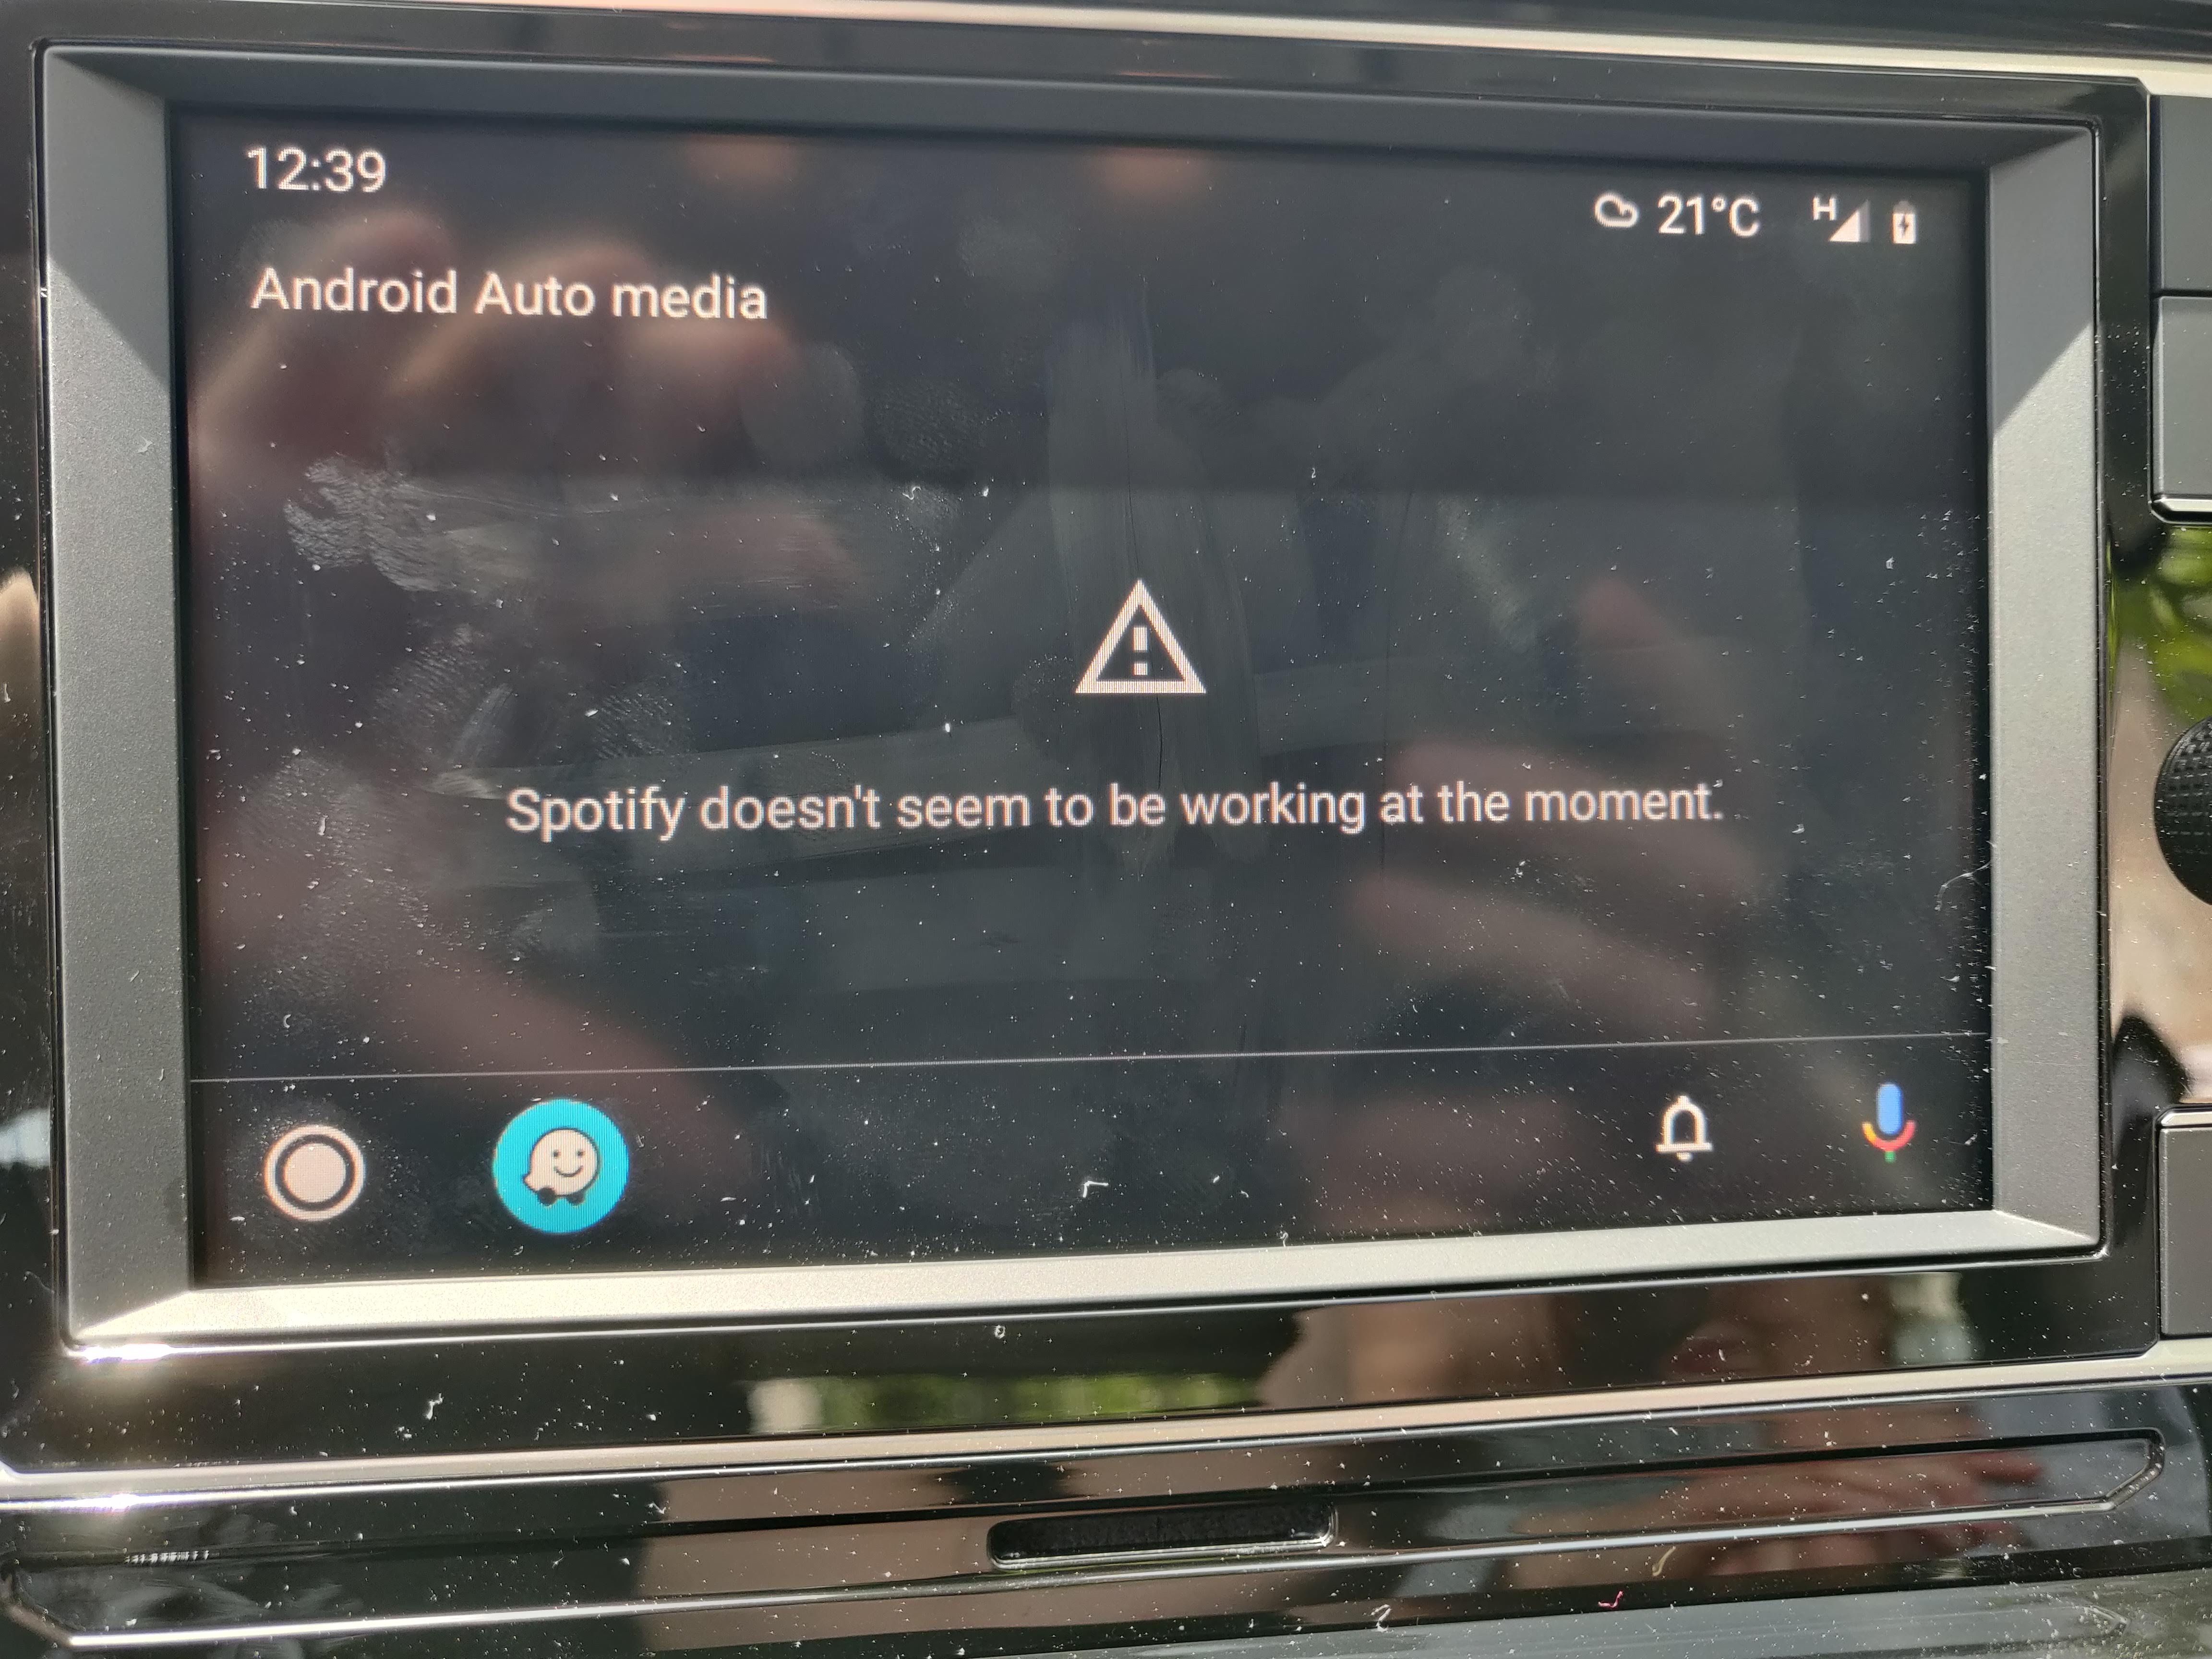 [Android Auto] "Spotify doesn't seem to be working...  Page 14  The